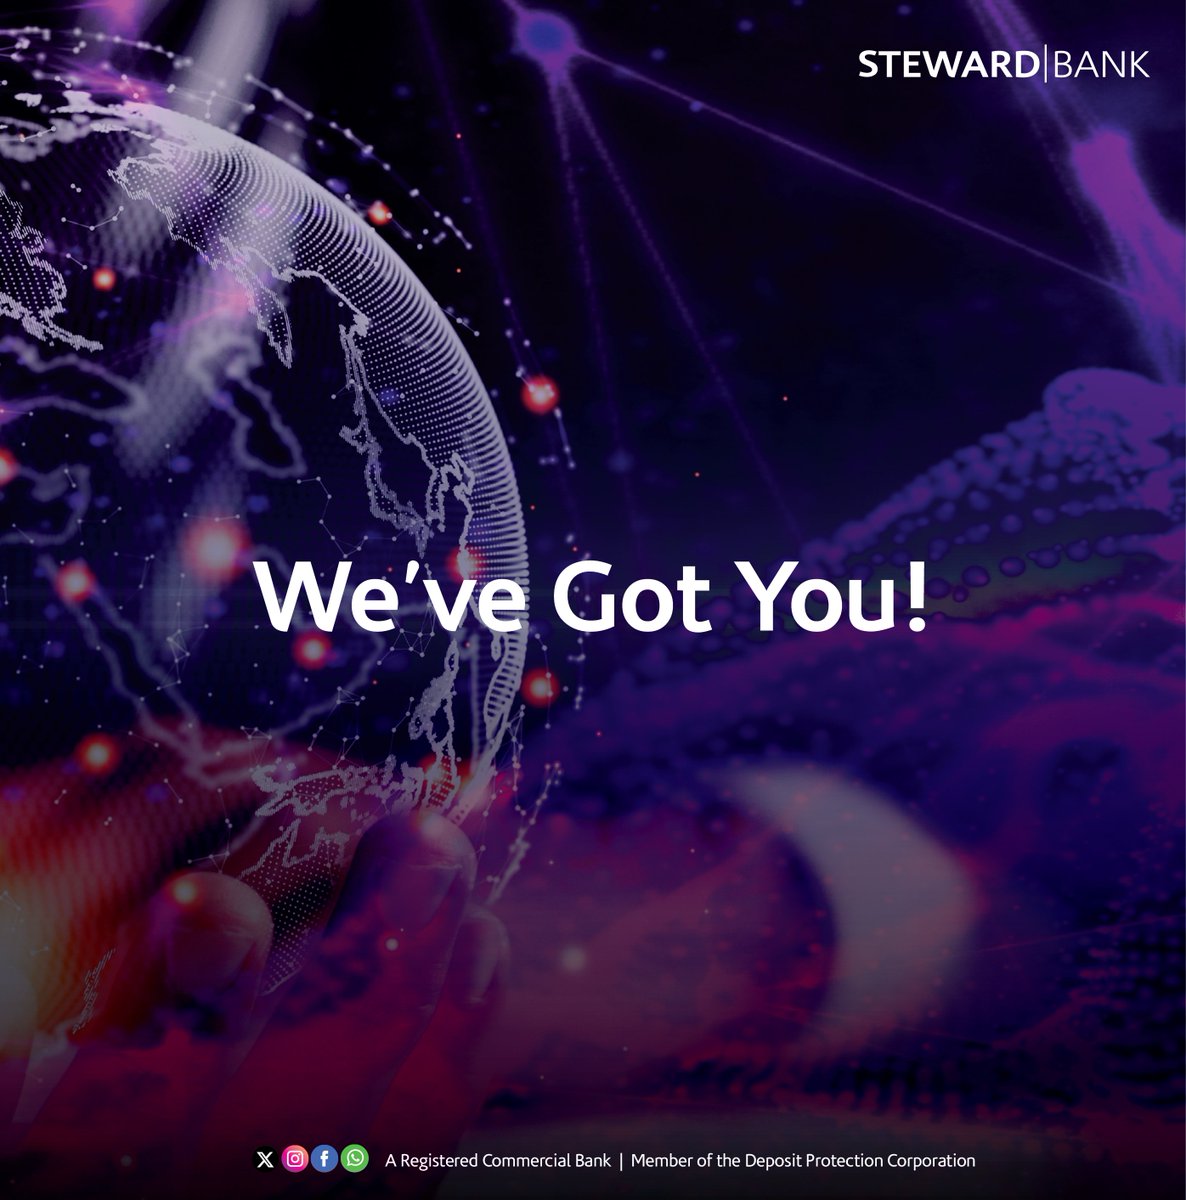 Bank anywhere and anytime in ZiG and USD on our digital platforms. ✅Dial *210# and *236# ✅Square App: onelink.to/3x8z94 ✅Visa App: onelink.to/sbvisa ✅Online Banking: banking.stewardbank.co.zw/register#/ ✅Q-Not Account Opening: auth.stewardbank.co.zw/auth/account-o… #WeVeGotYou